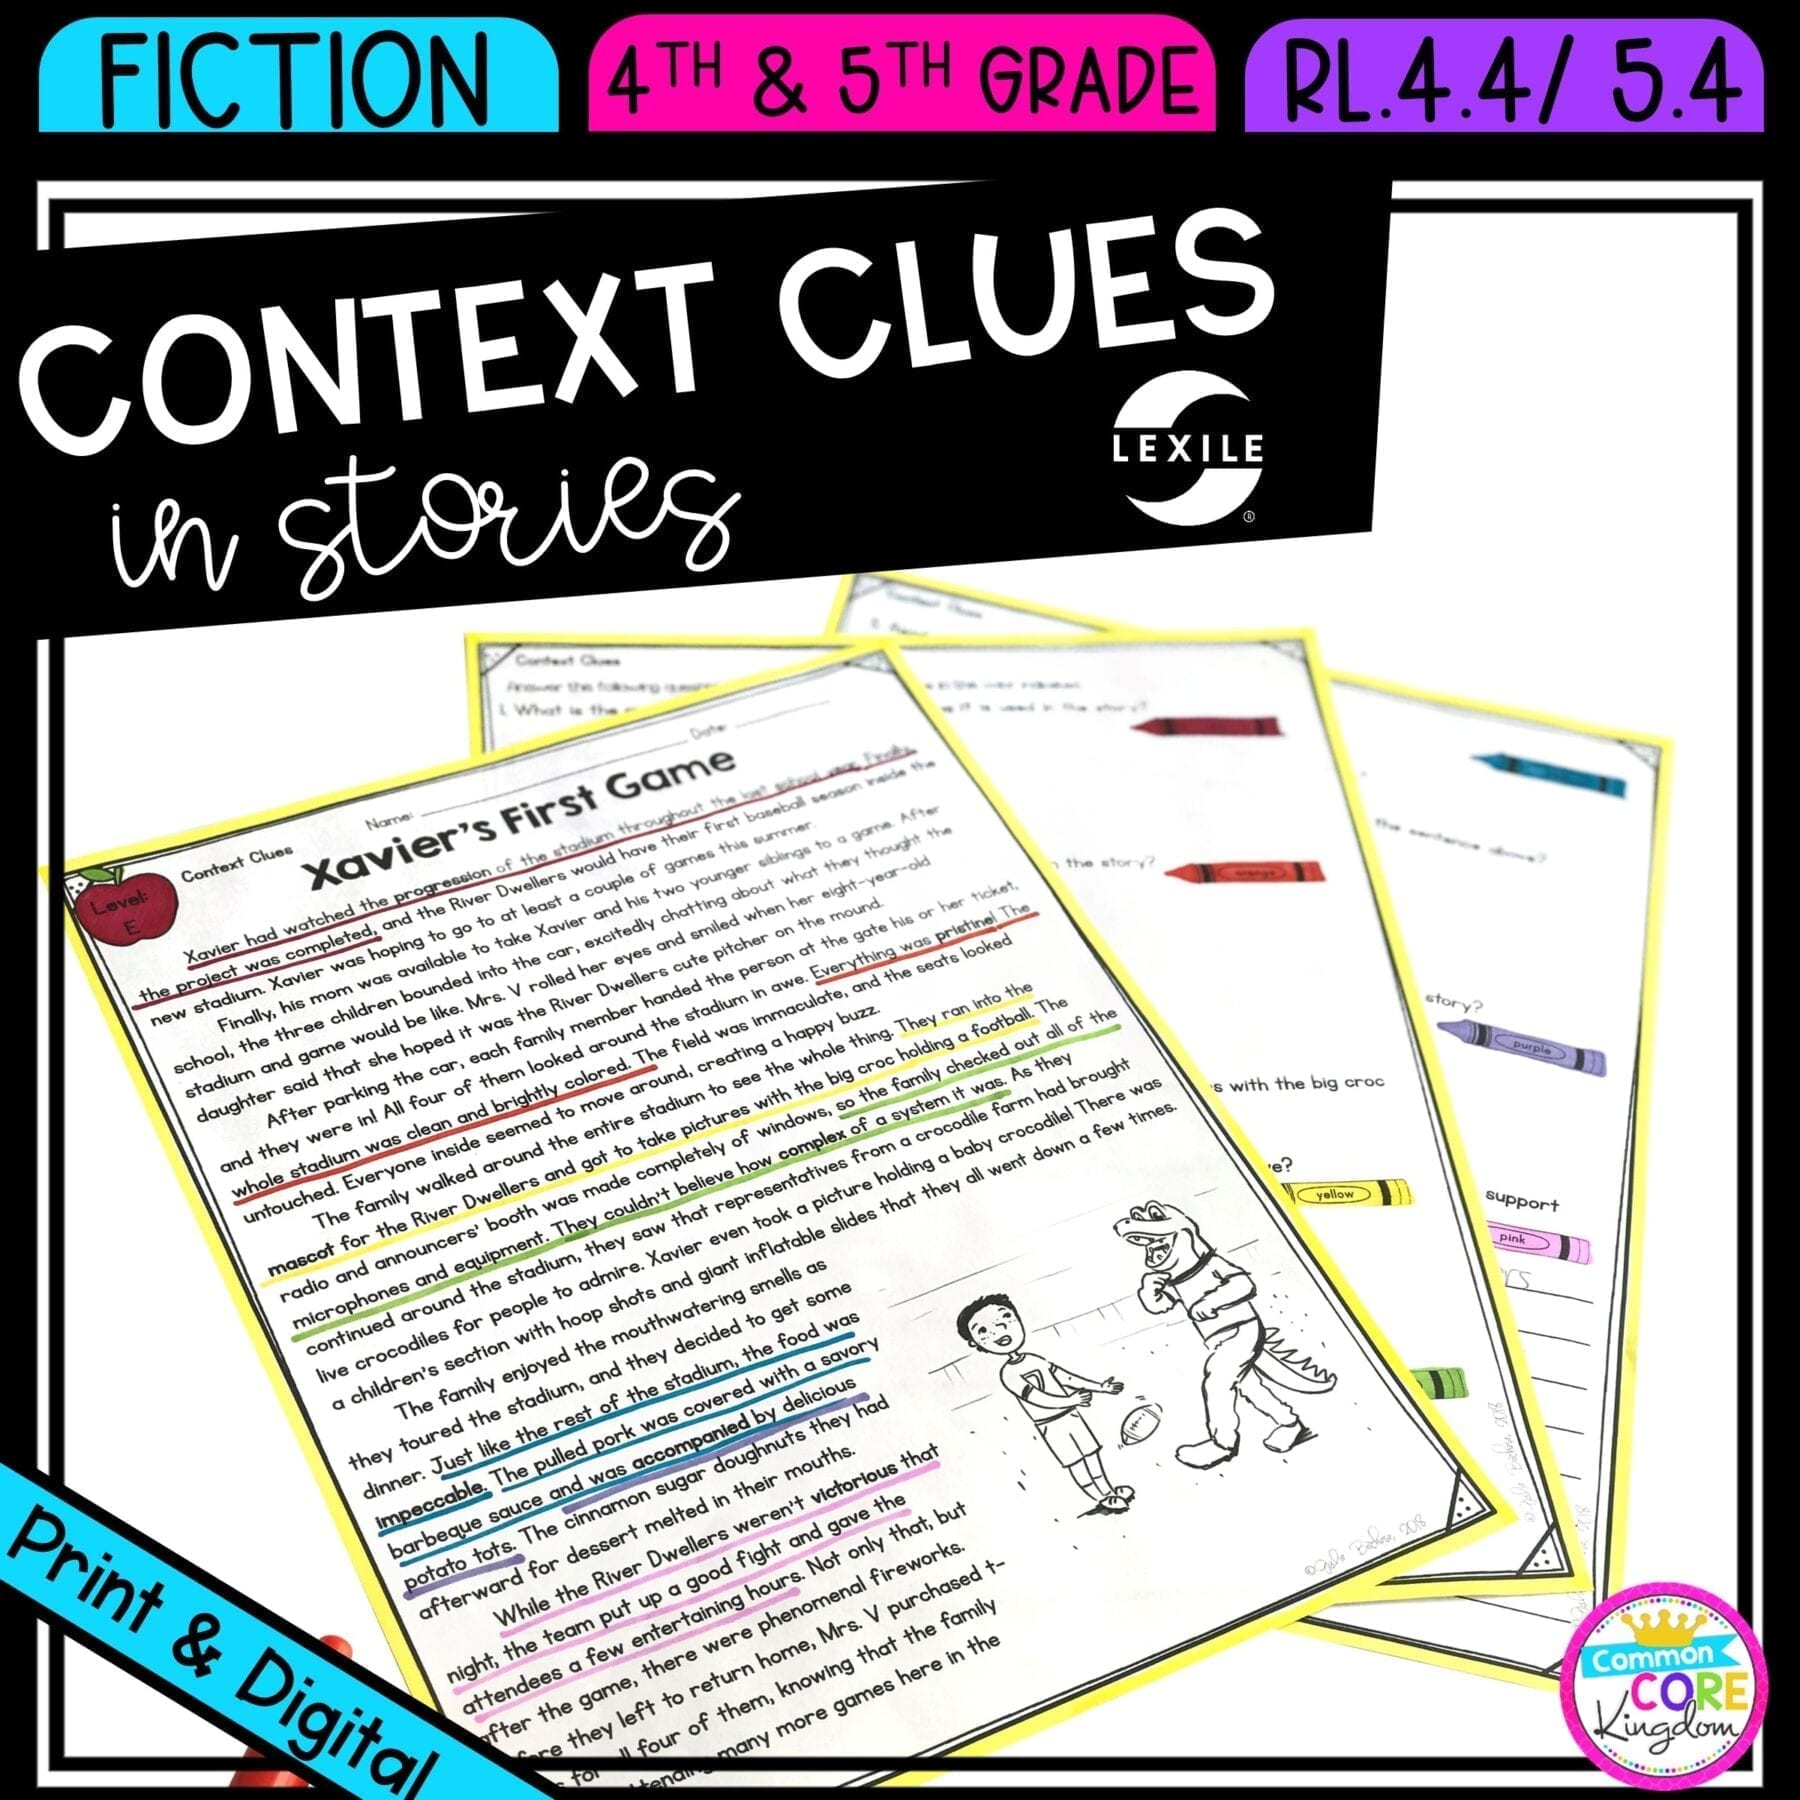 Context clues in stories for 4th & 5th grade cover showing printable and digital worksheets